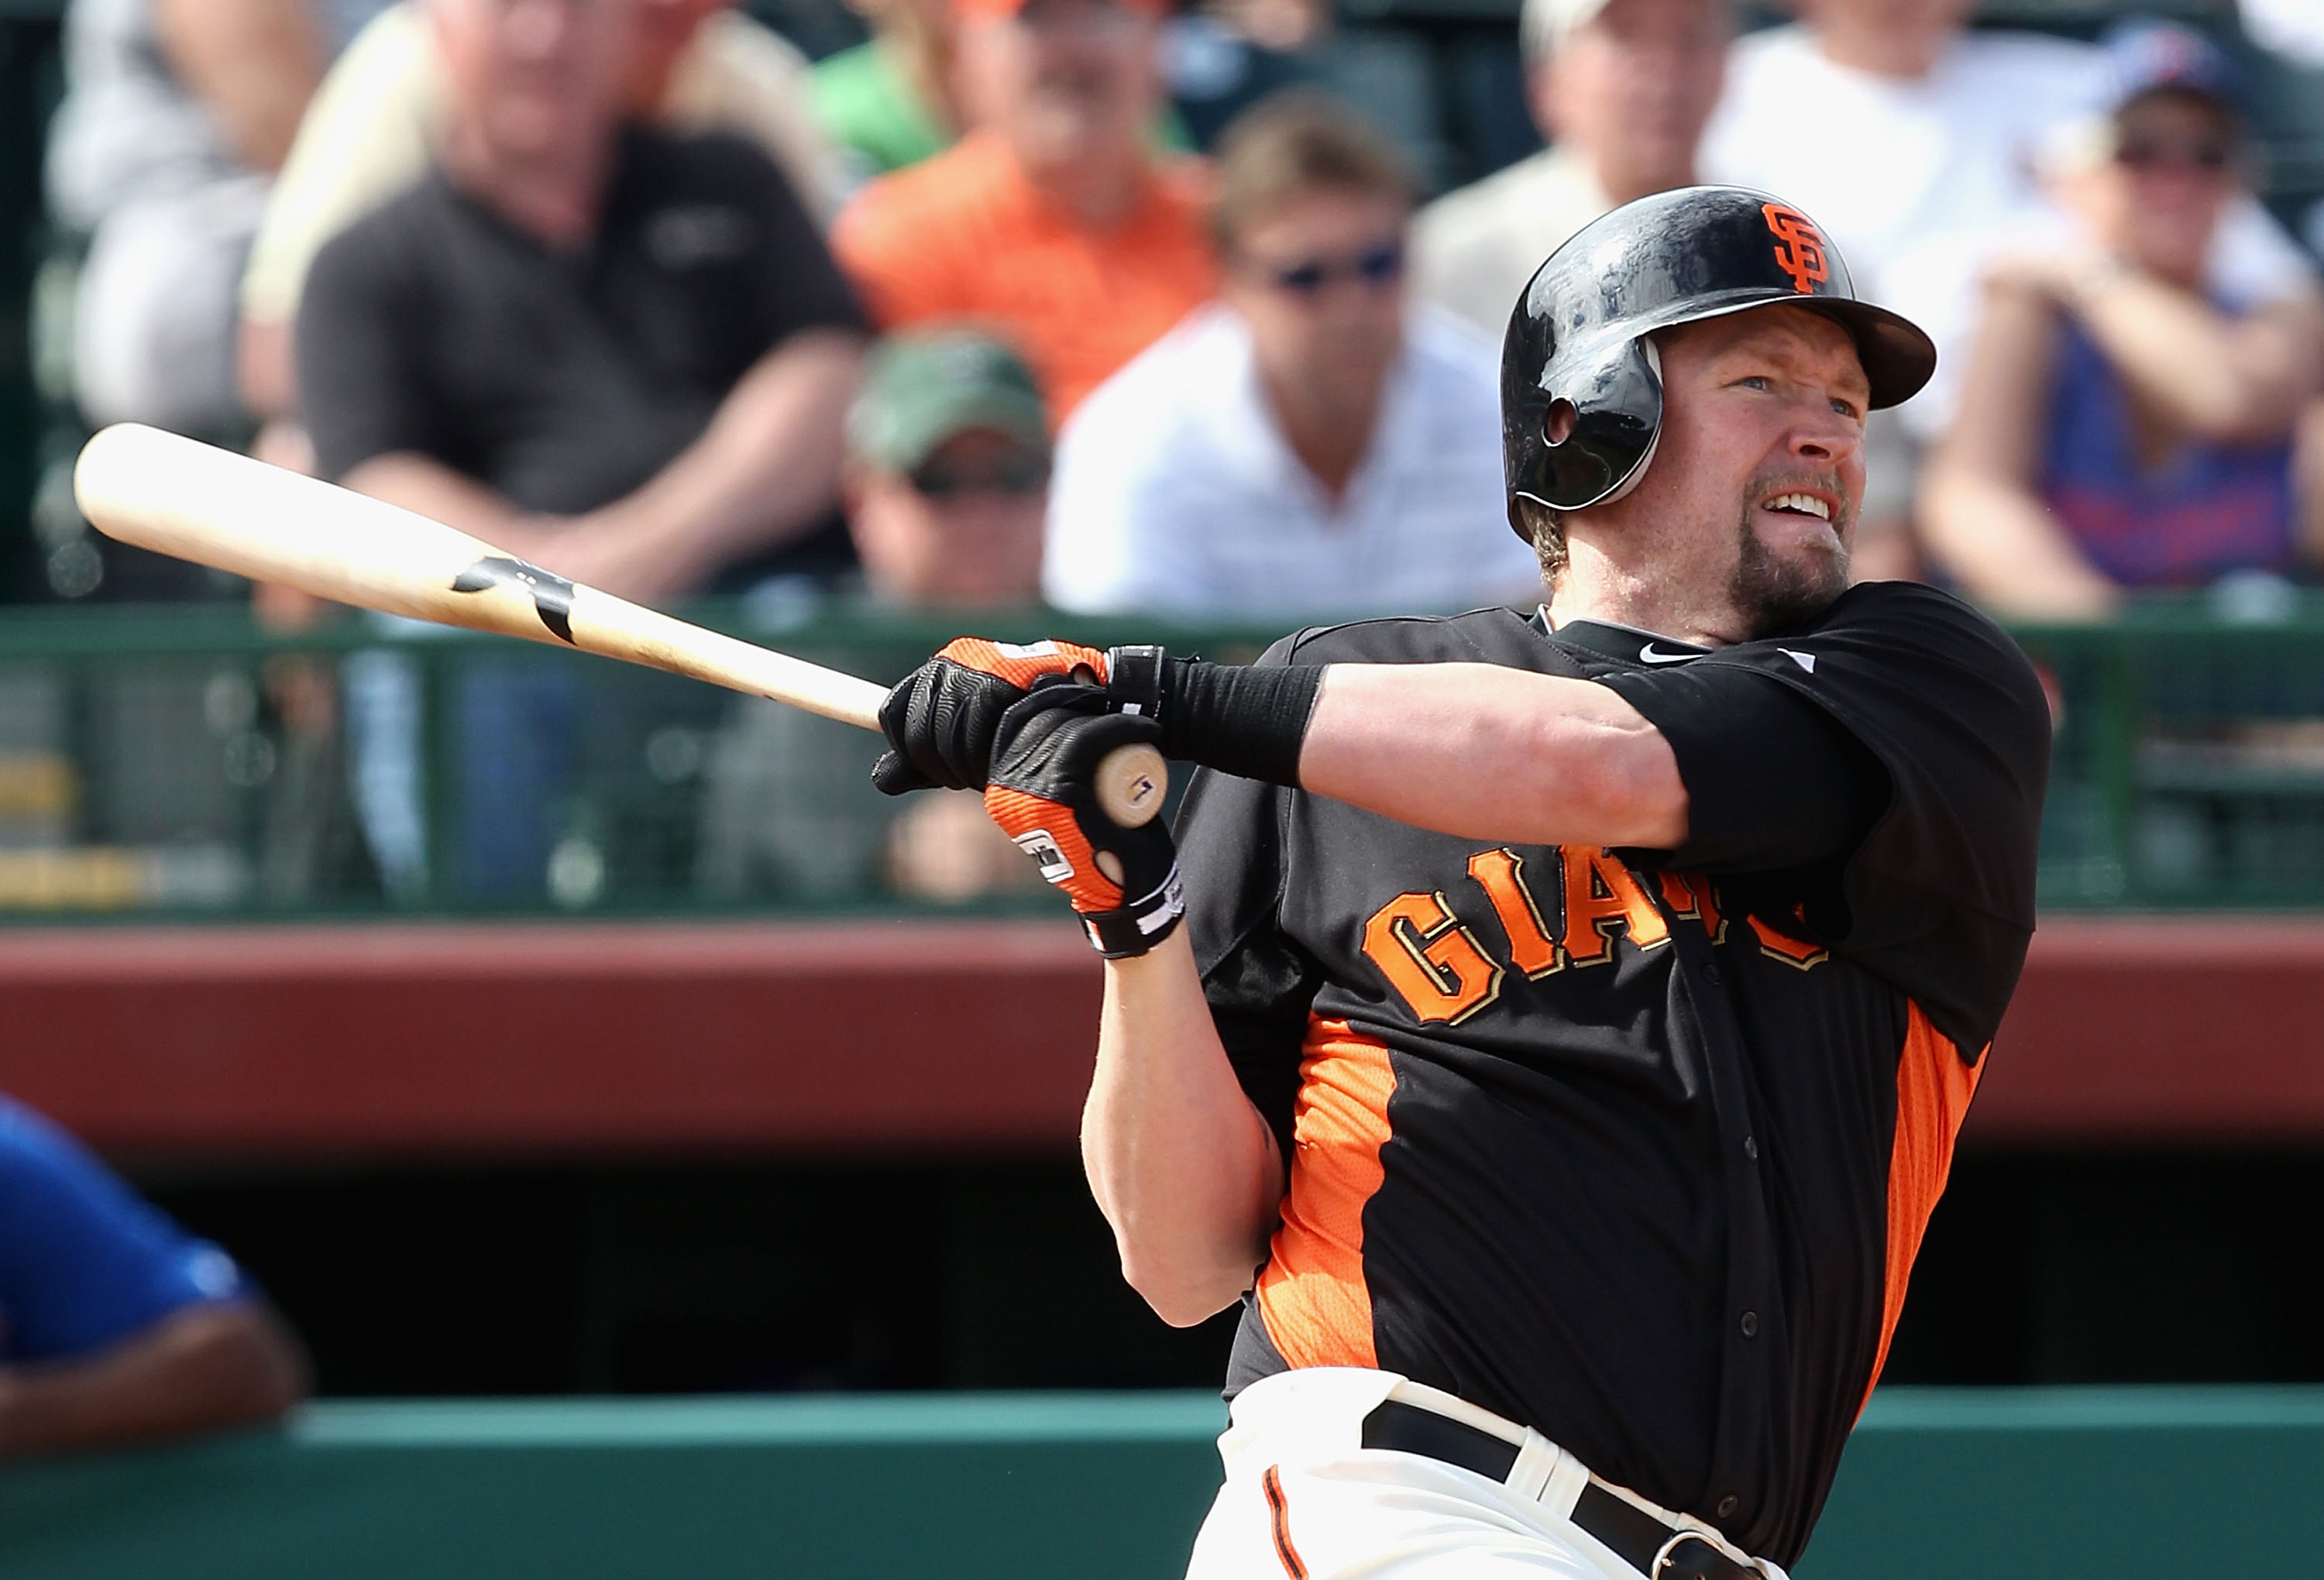 SCOTTSDALE, AZ - MARCH 01:  Aubrey Huff #17 of the San Francisco Giants bats against the Chicago Cubs during the spring training game at Scottsdale Stadium on March 1, 2011 in Scottsdale, Arizona.  (Photo by Christian Petersen/Getty Images)